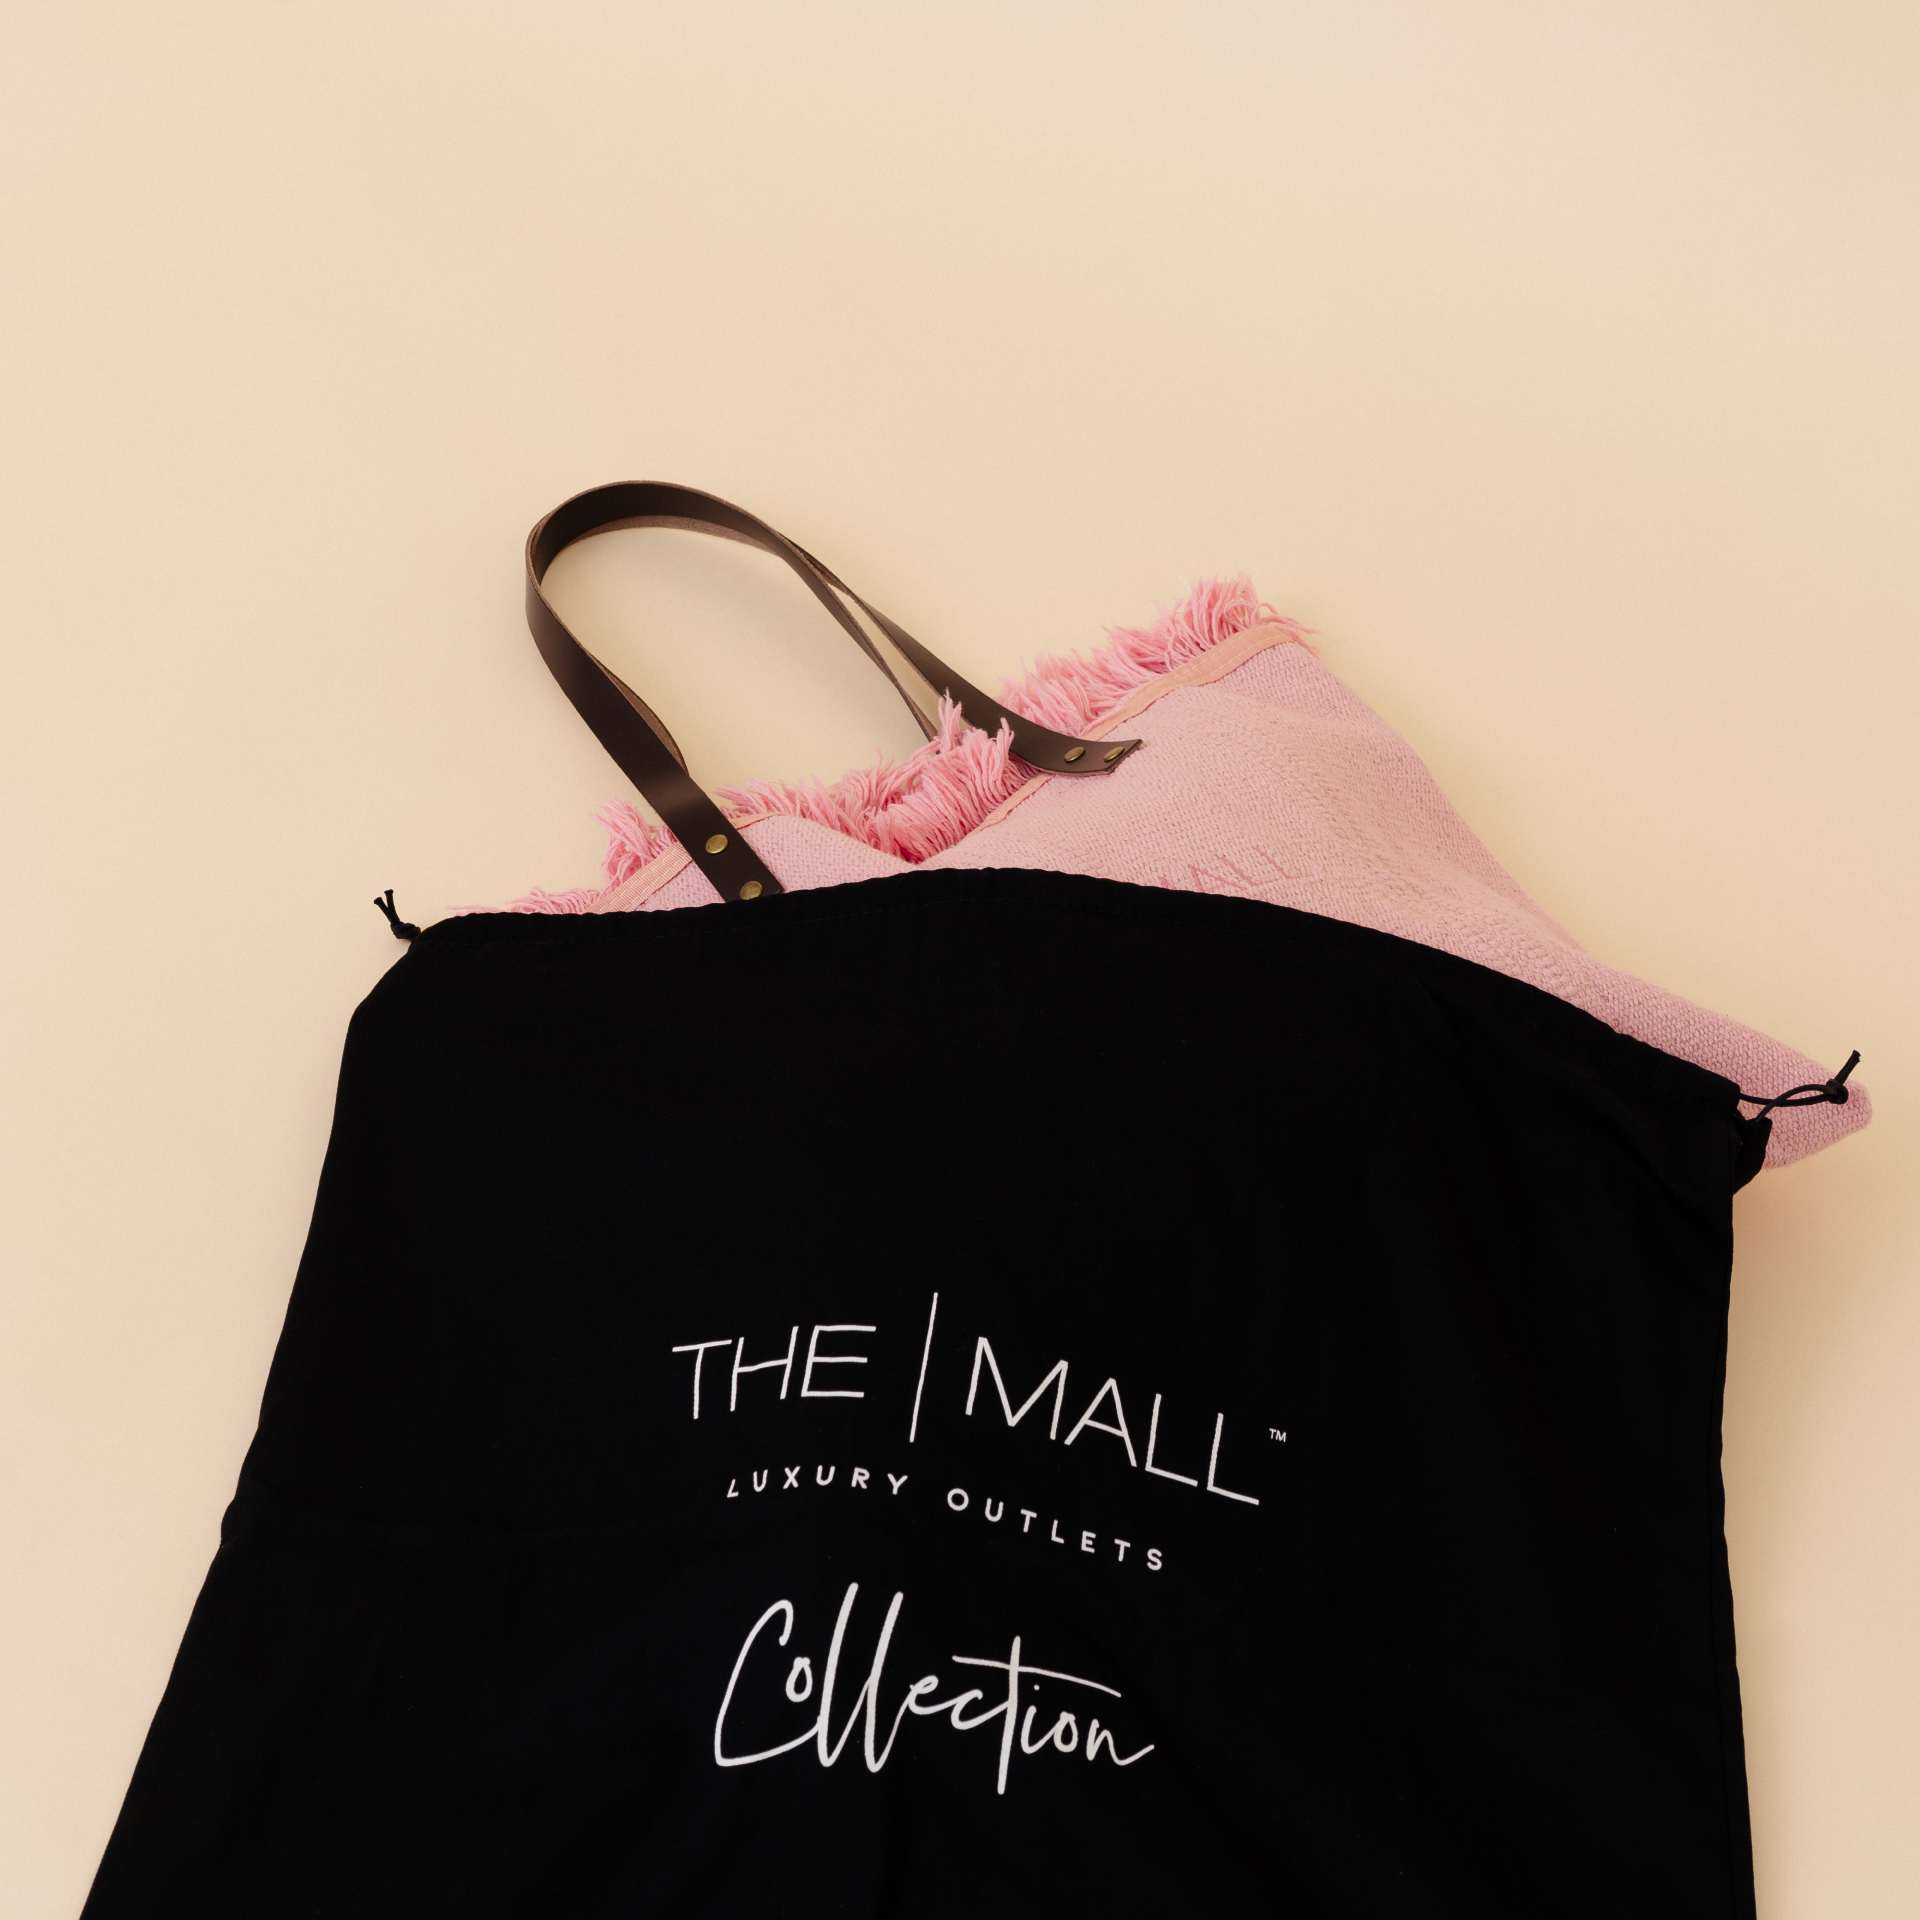 The Mall Luxury Outlets Collection